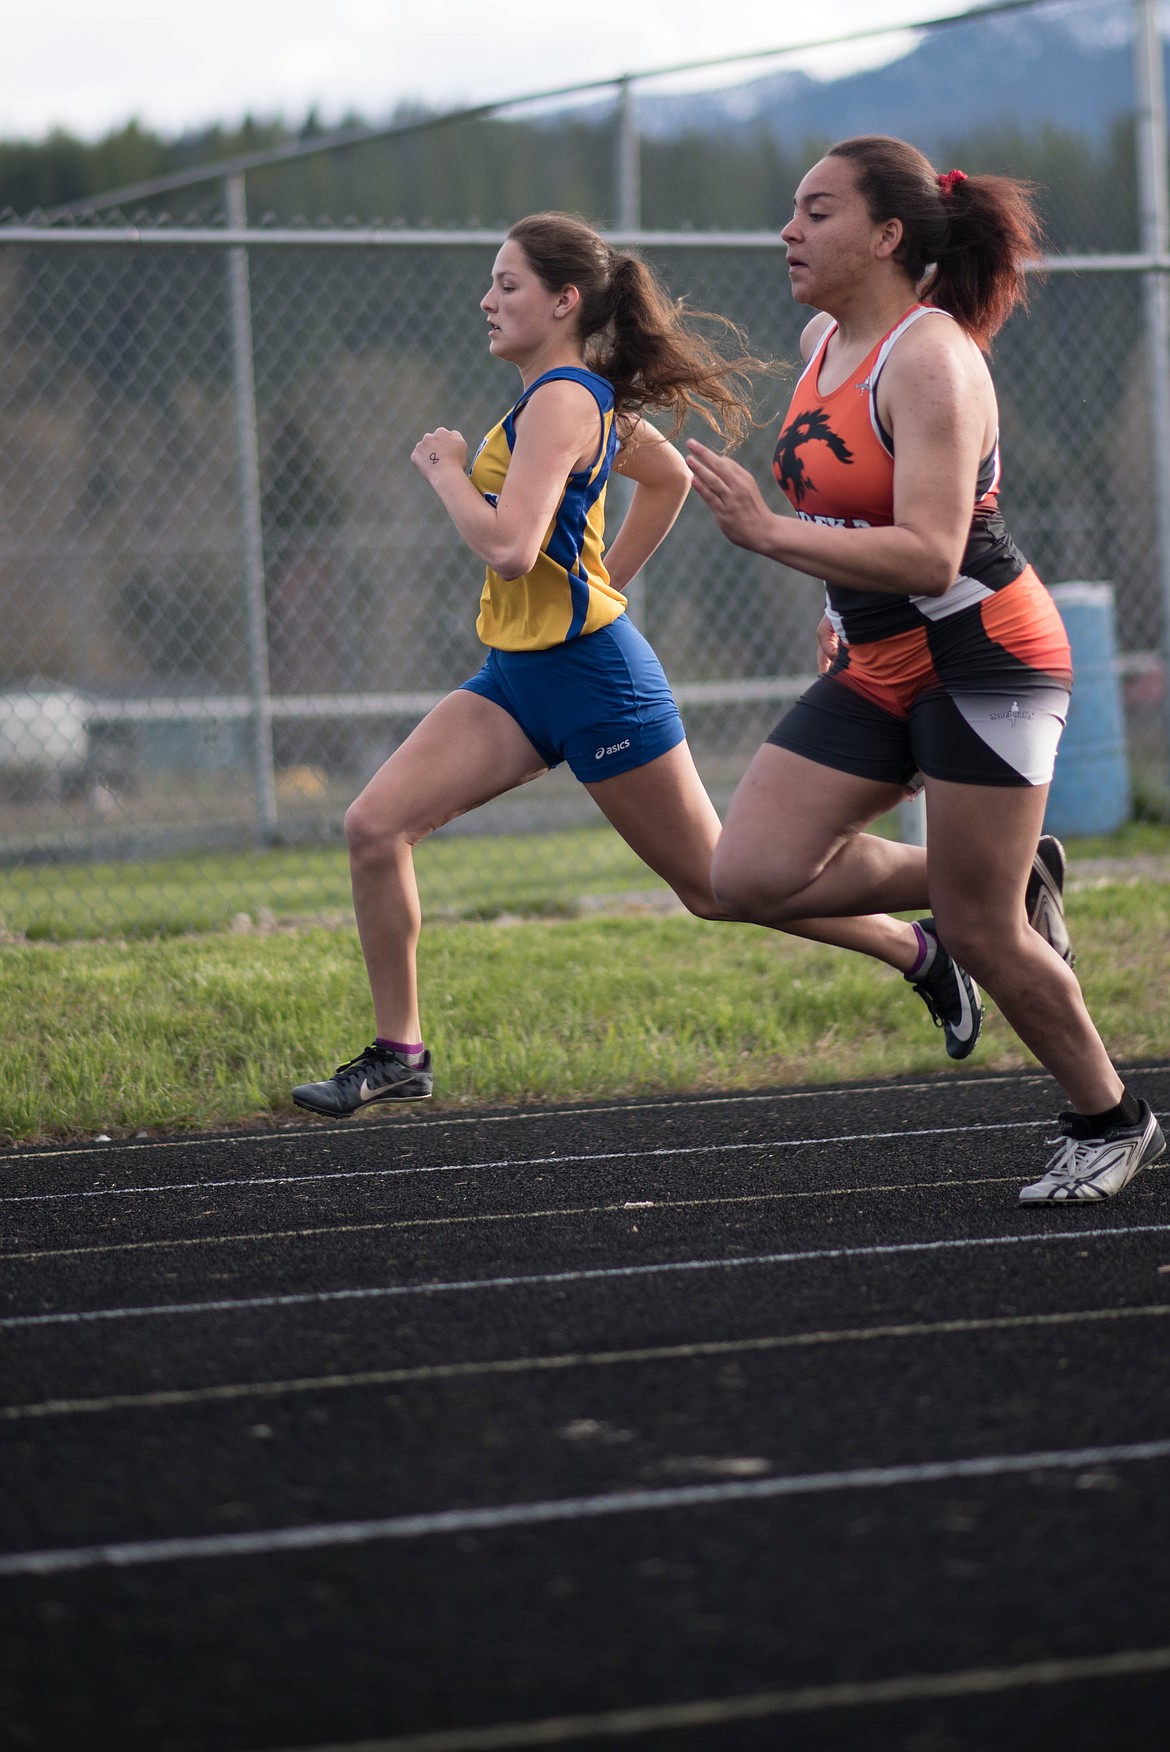 Emma Gruber, left, races the 200 meter, Tuesday at the Lincoln County Track Meet in Libby. (Luke Hollister/The Western News)